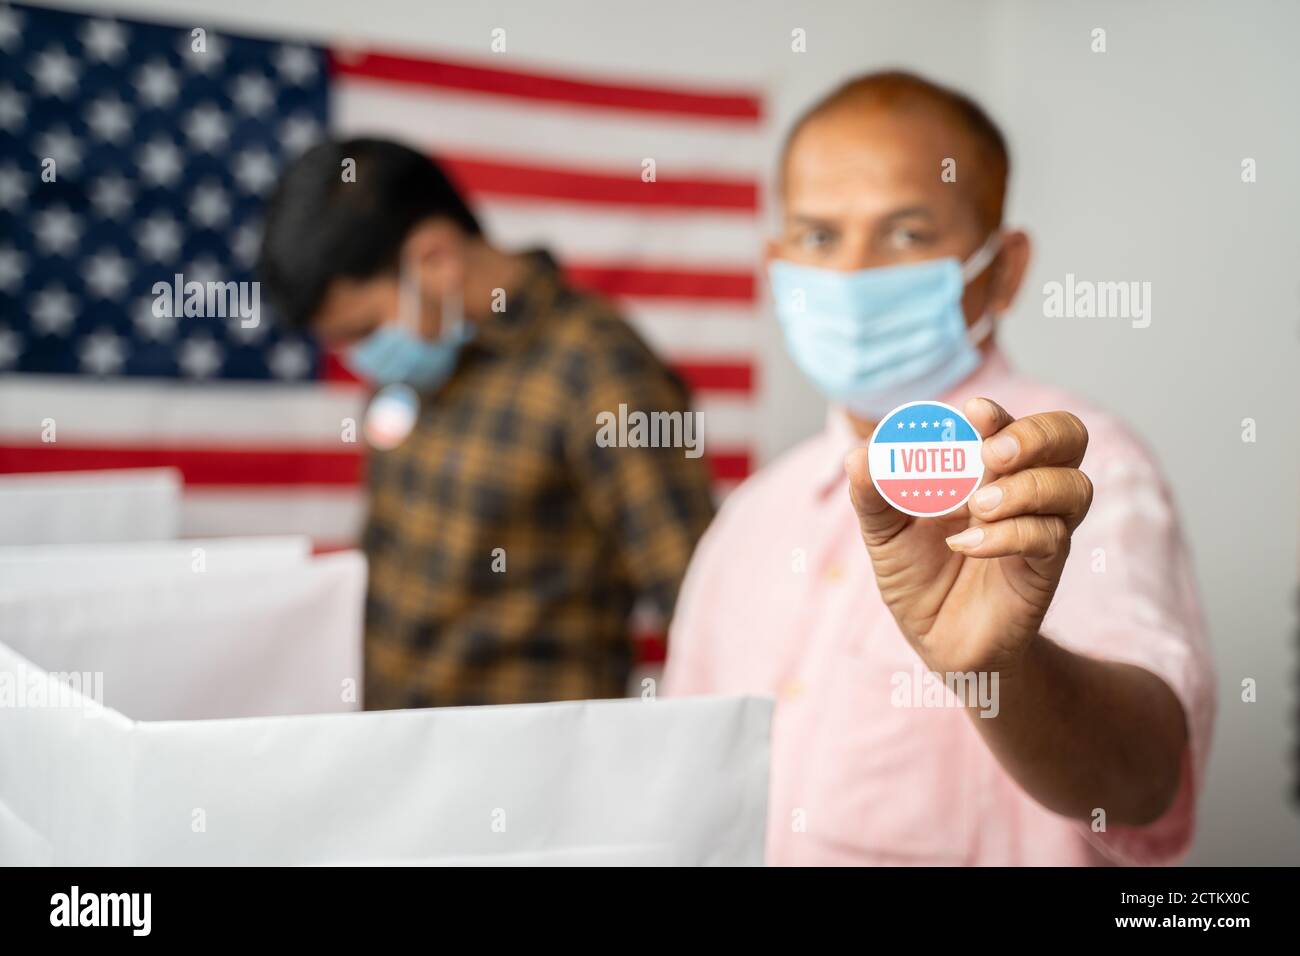 Man in medical mask showing I voted Sticker at polling booth with US flag as background - concept in person voting at US election. Stock Photo